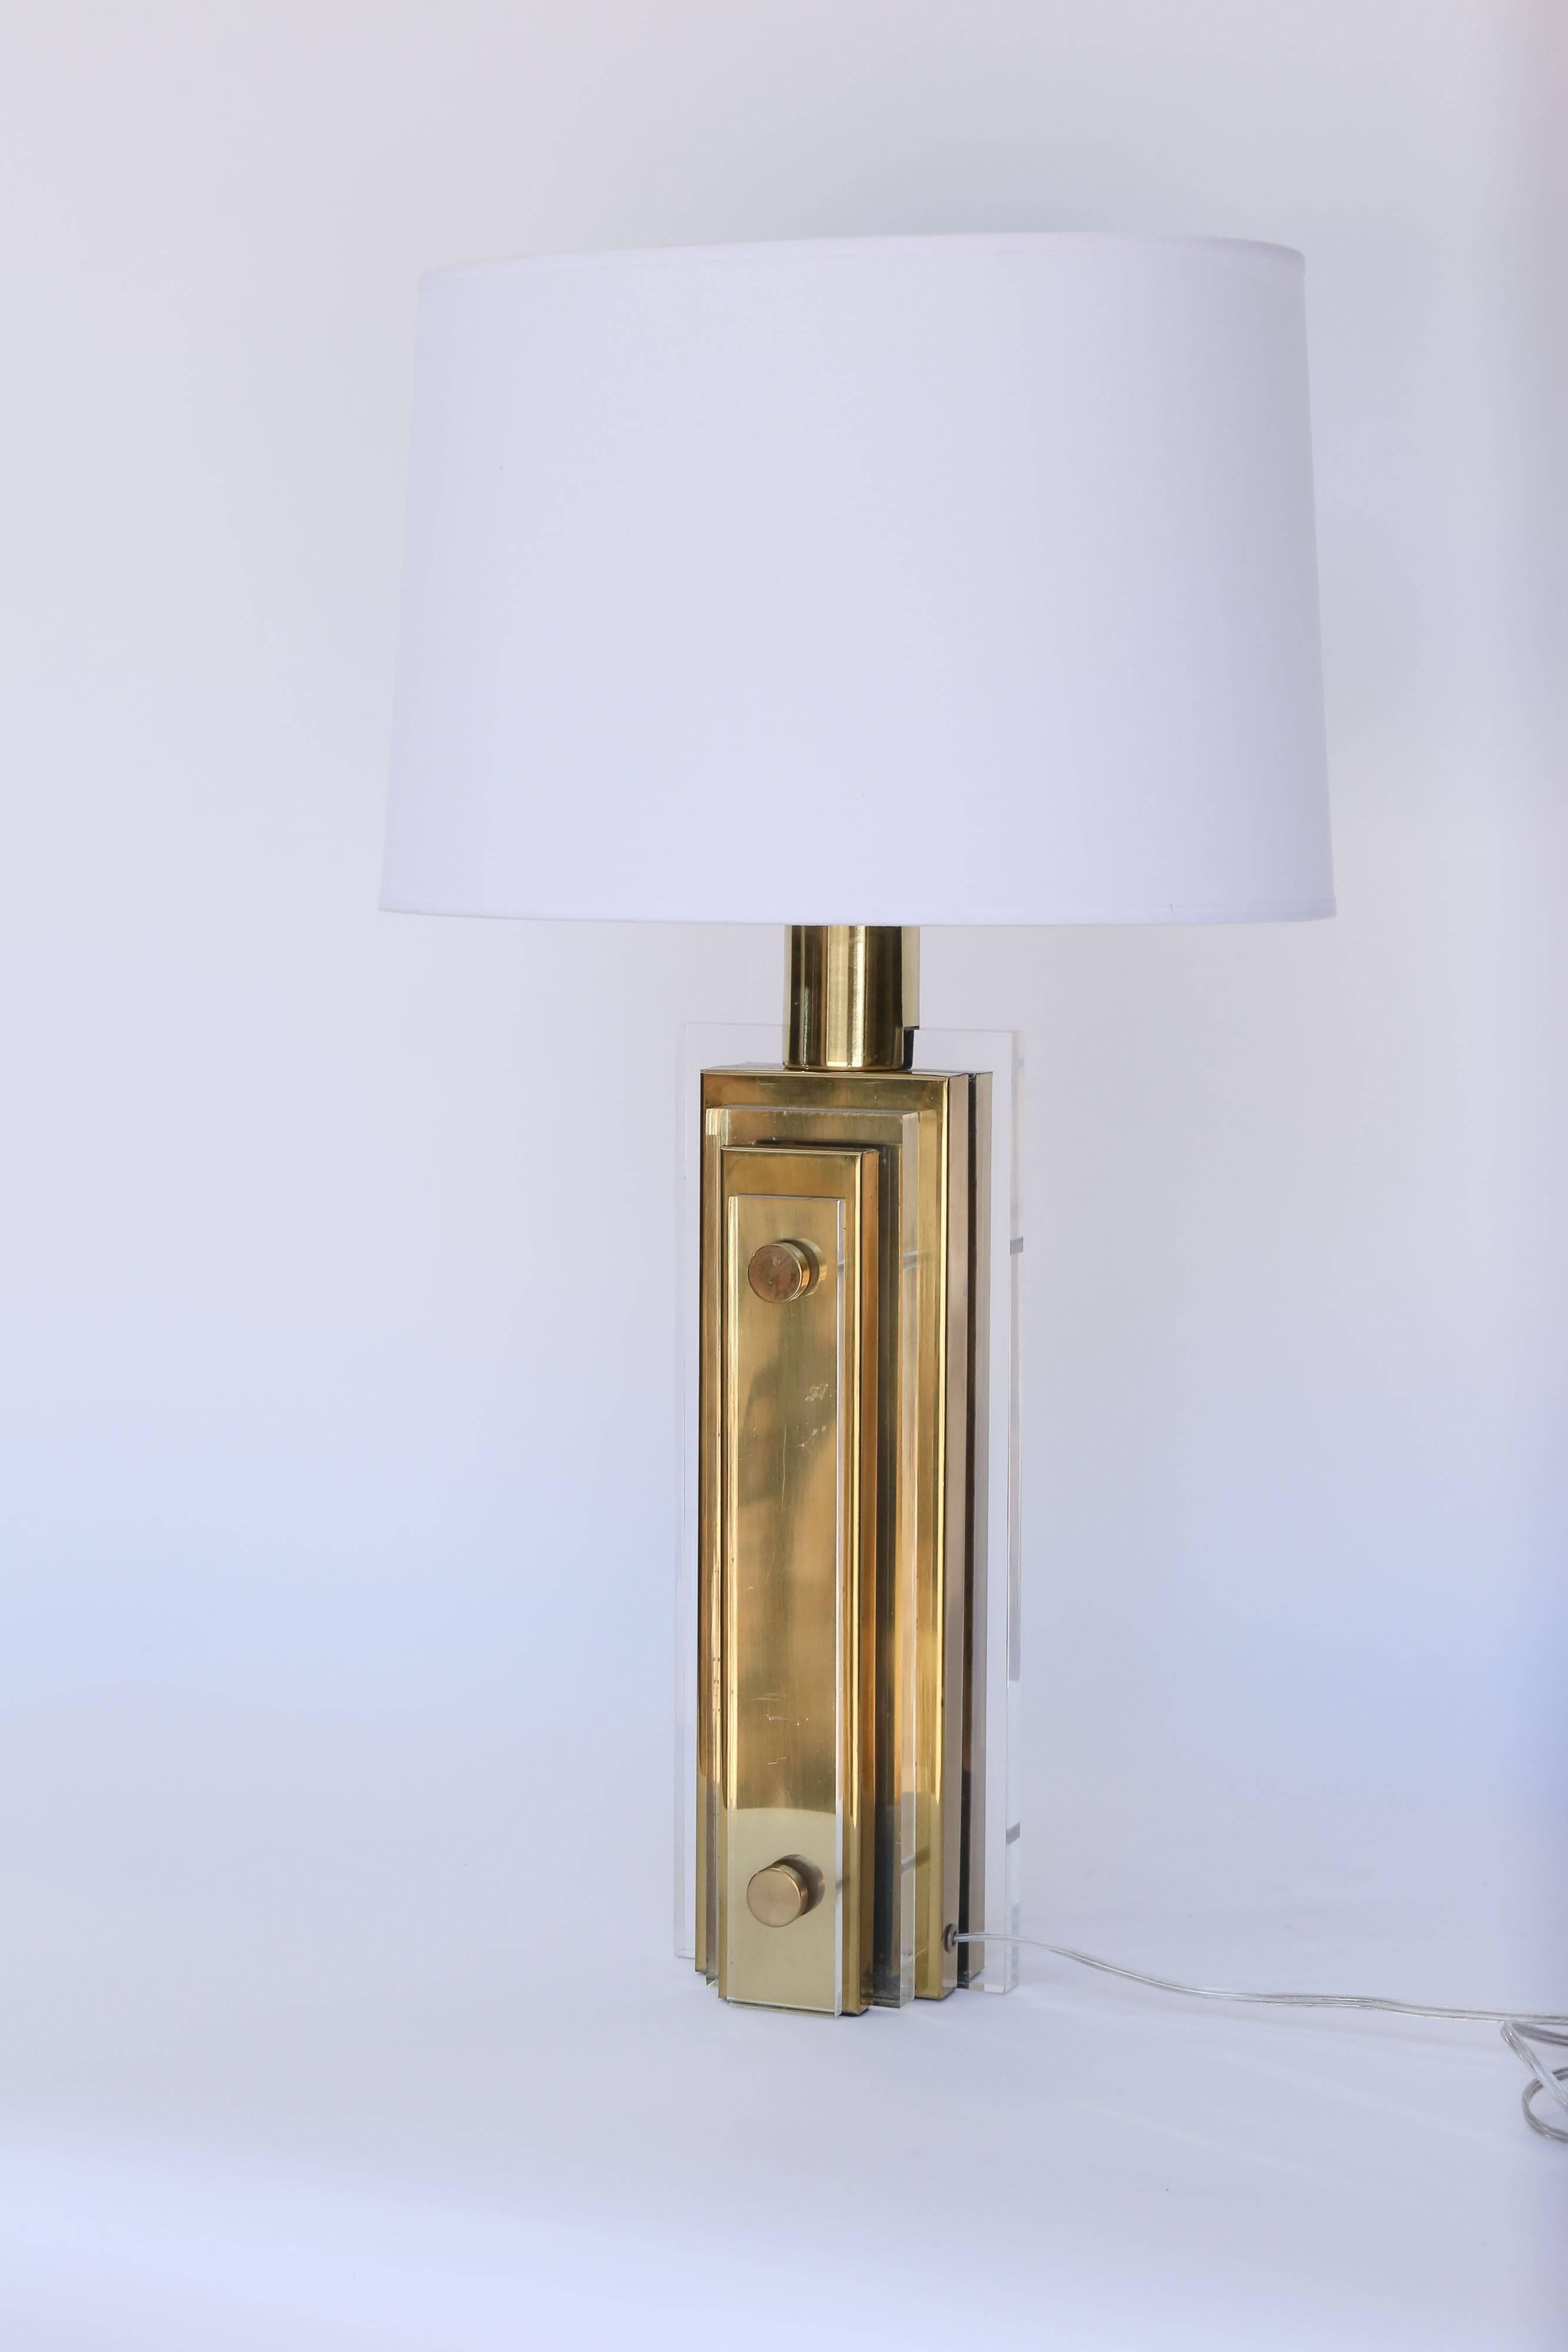 A dramatic brass and acrylic table lamp reminiscent of the Cityscape style of Paul Evans. Alternating slabs of brass and acrylic of ascending heights are pierced by two brass rods. Topped by a white oval shade measuring 9.5 inches by 15 inches.